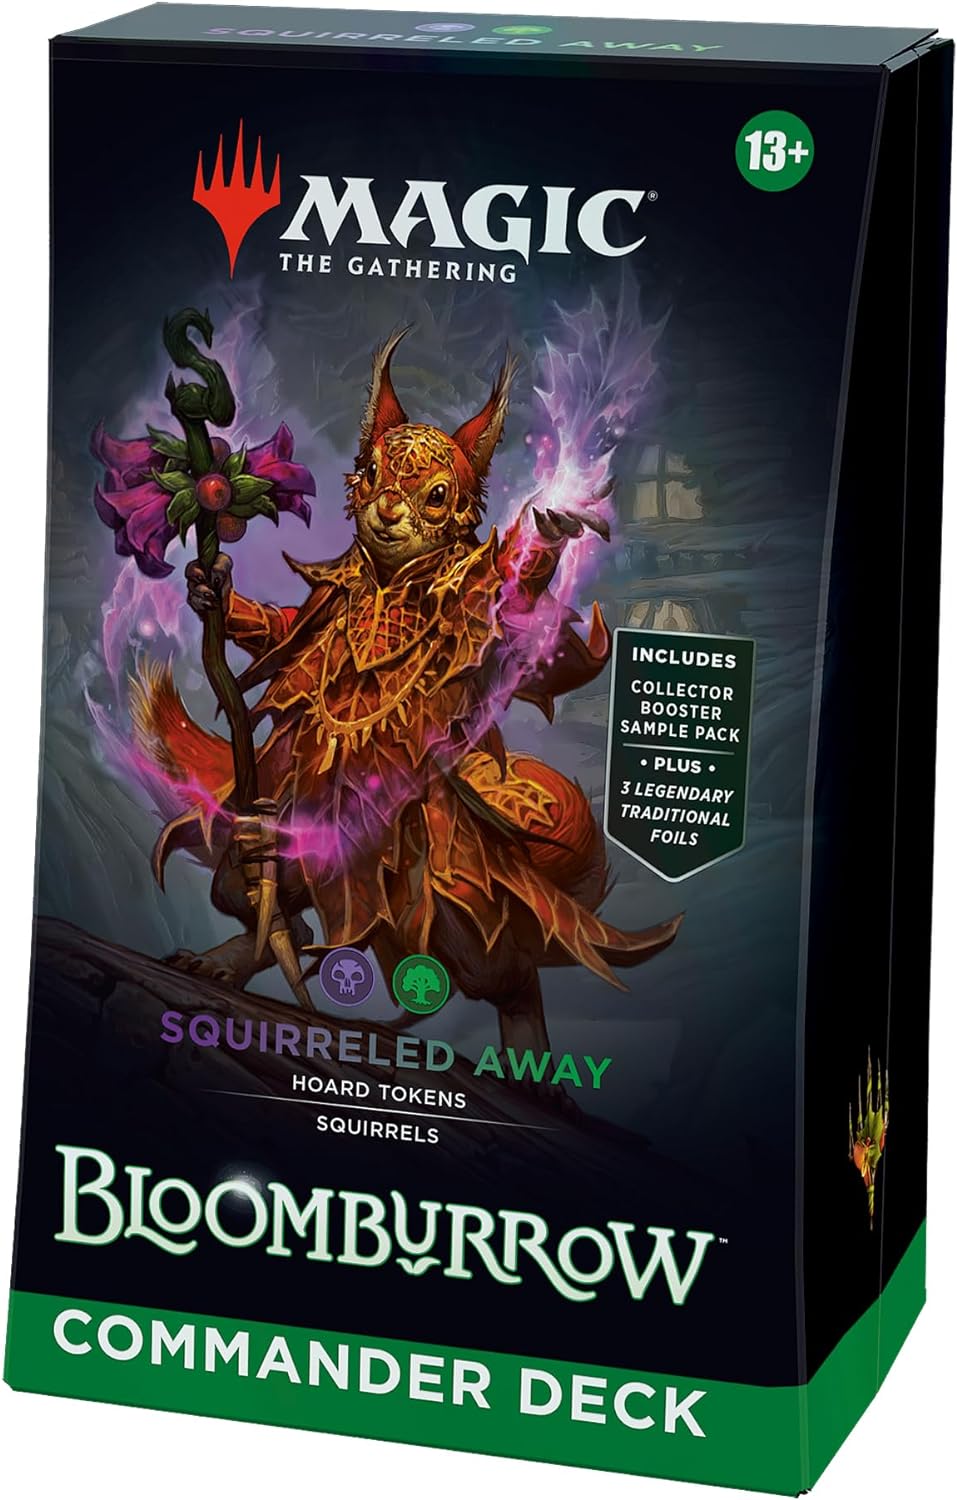 PRE-ORDER: Bloomburrow Commander Deck - Squirreled Away (100-Card Deck, 2-Card Collector Booster Sample Pack + Accessories) Magic:The Gathering